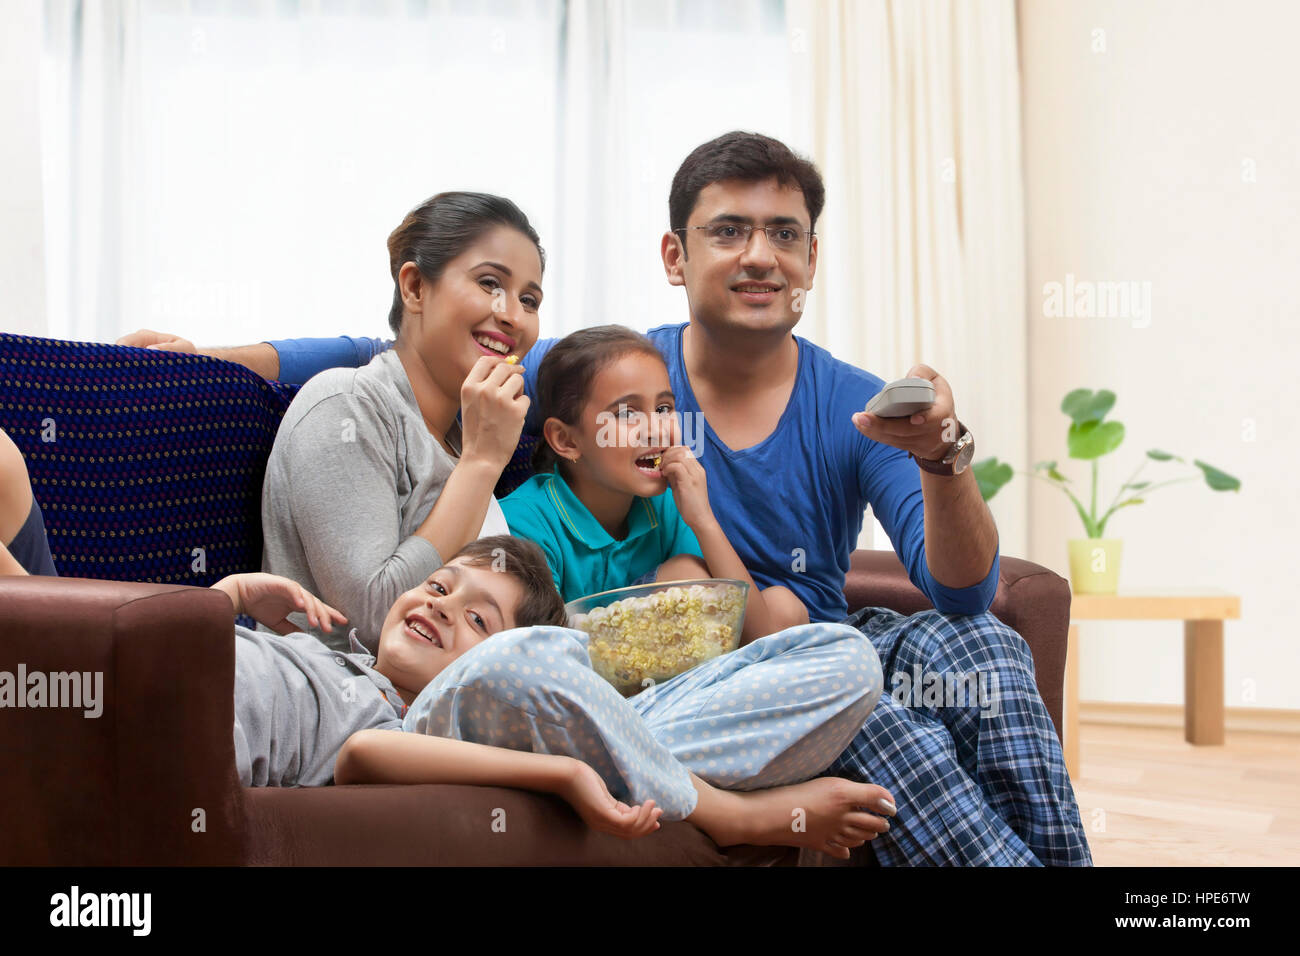 Smiling young family watching television together and eating popcorn Stock Photo